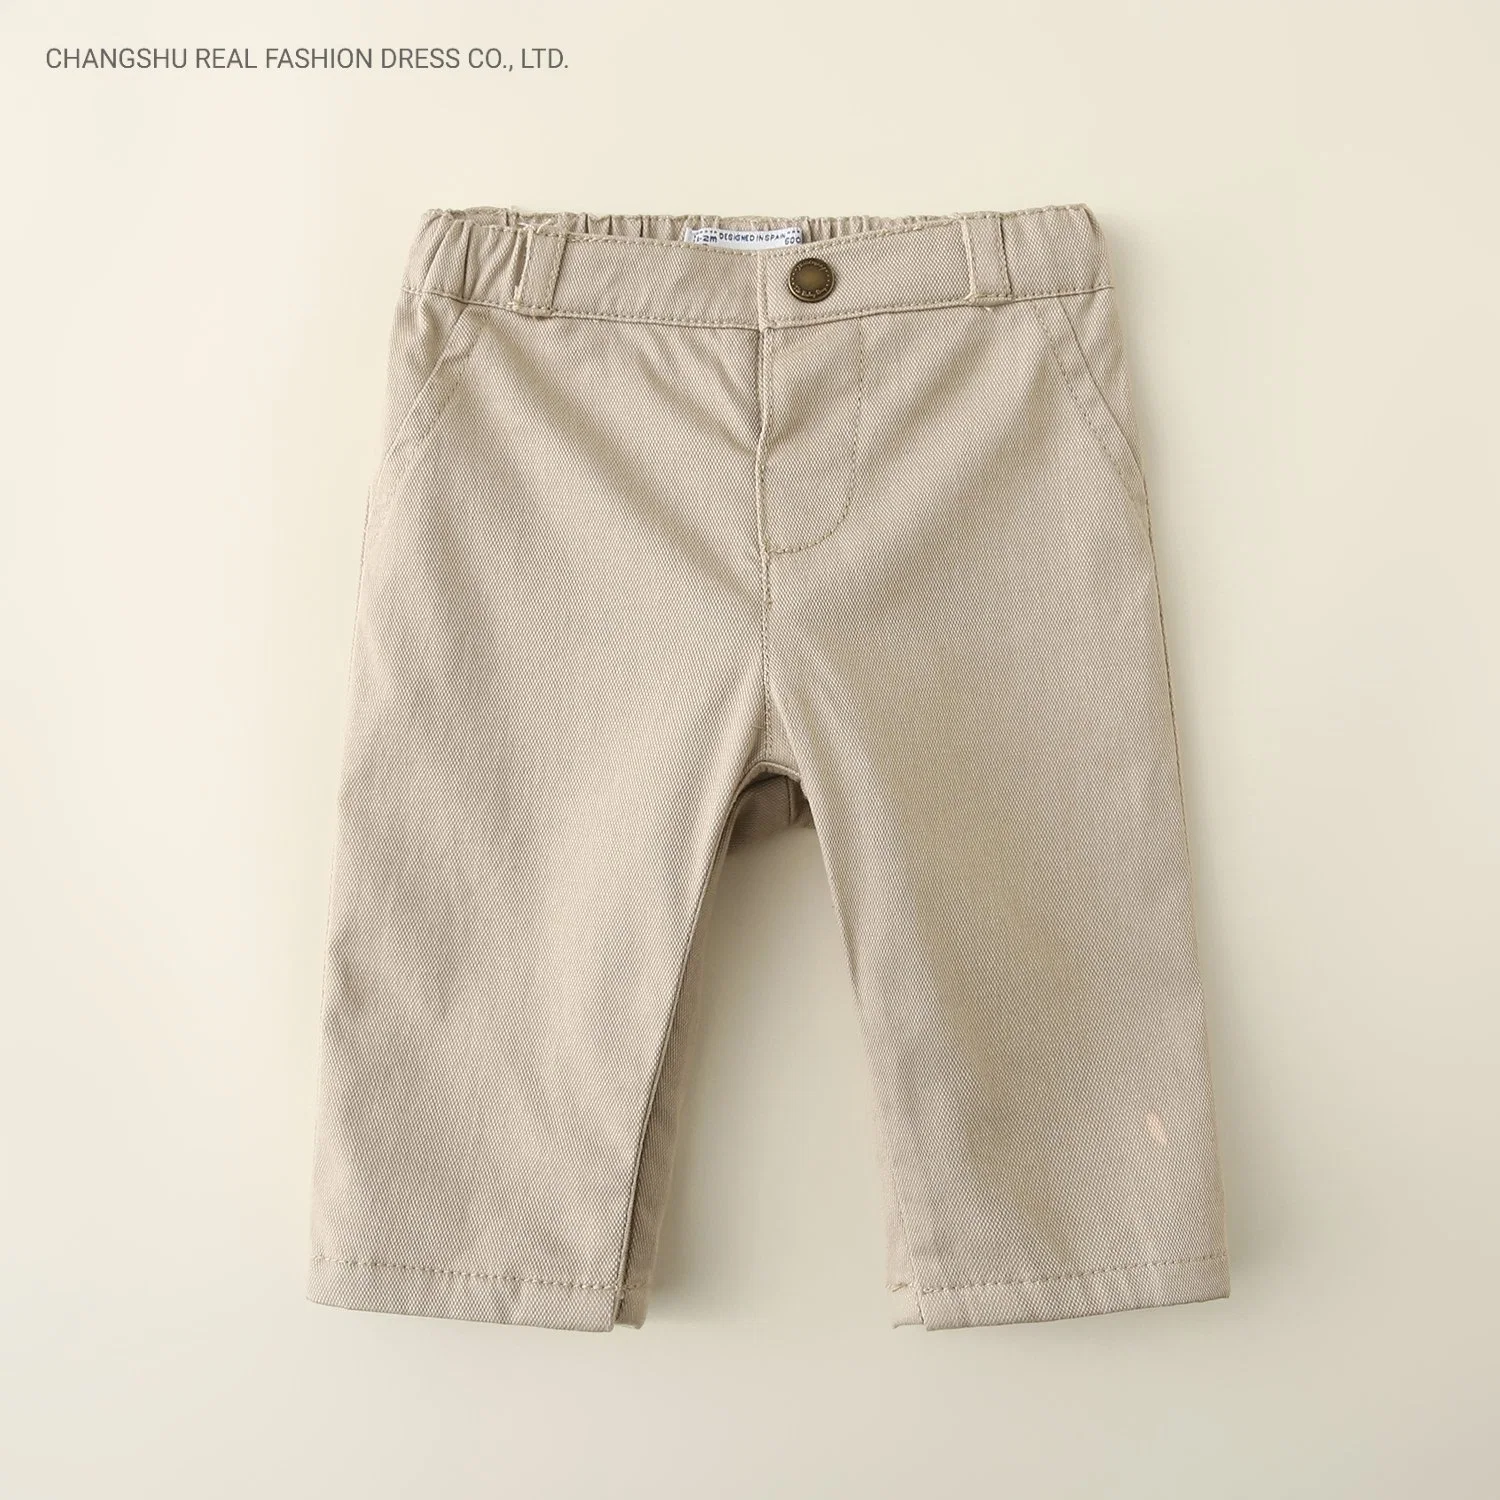 Baby Taupe Color Pant Clothes with Antique Brass Snap and Metal Zipper Front Fly